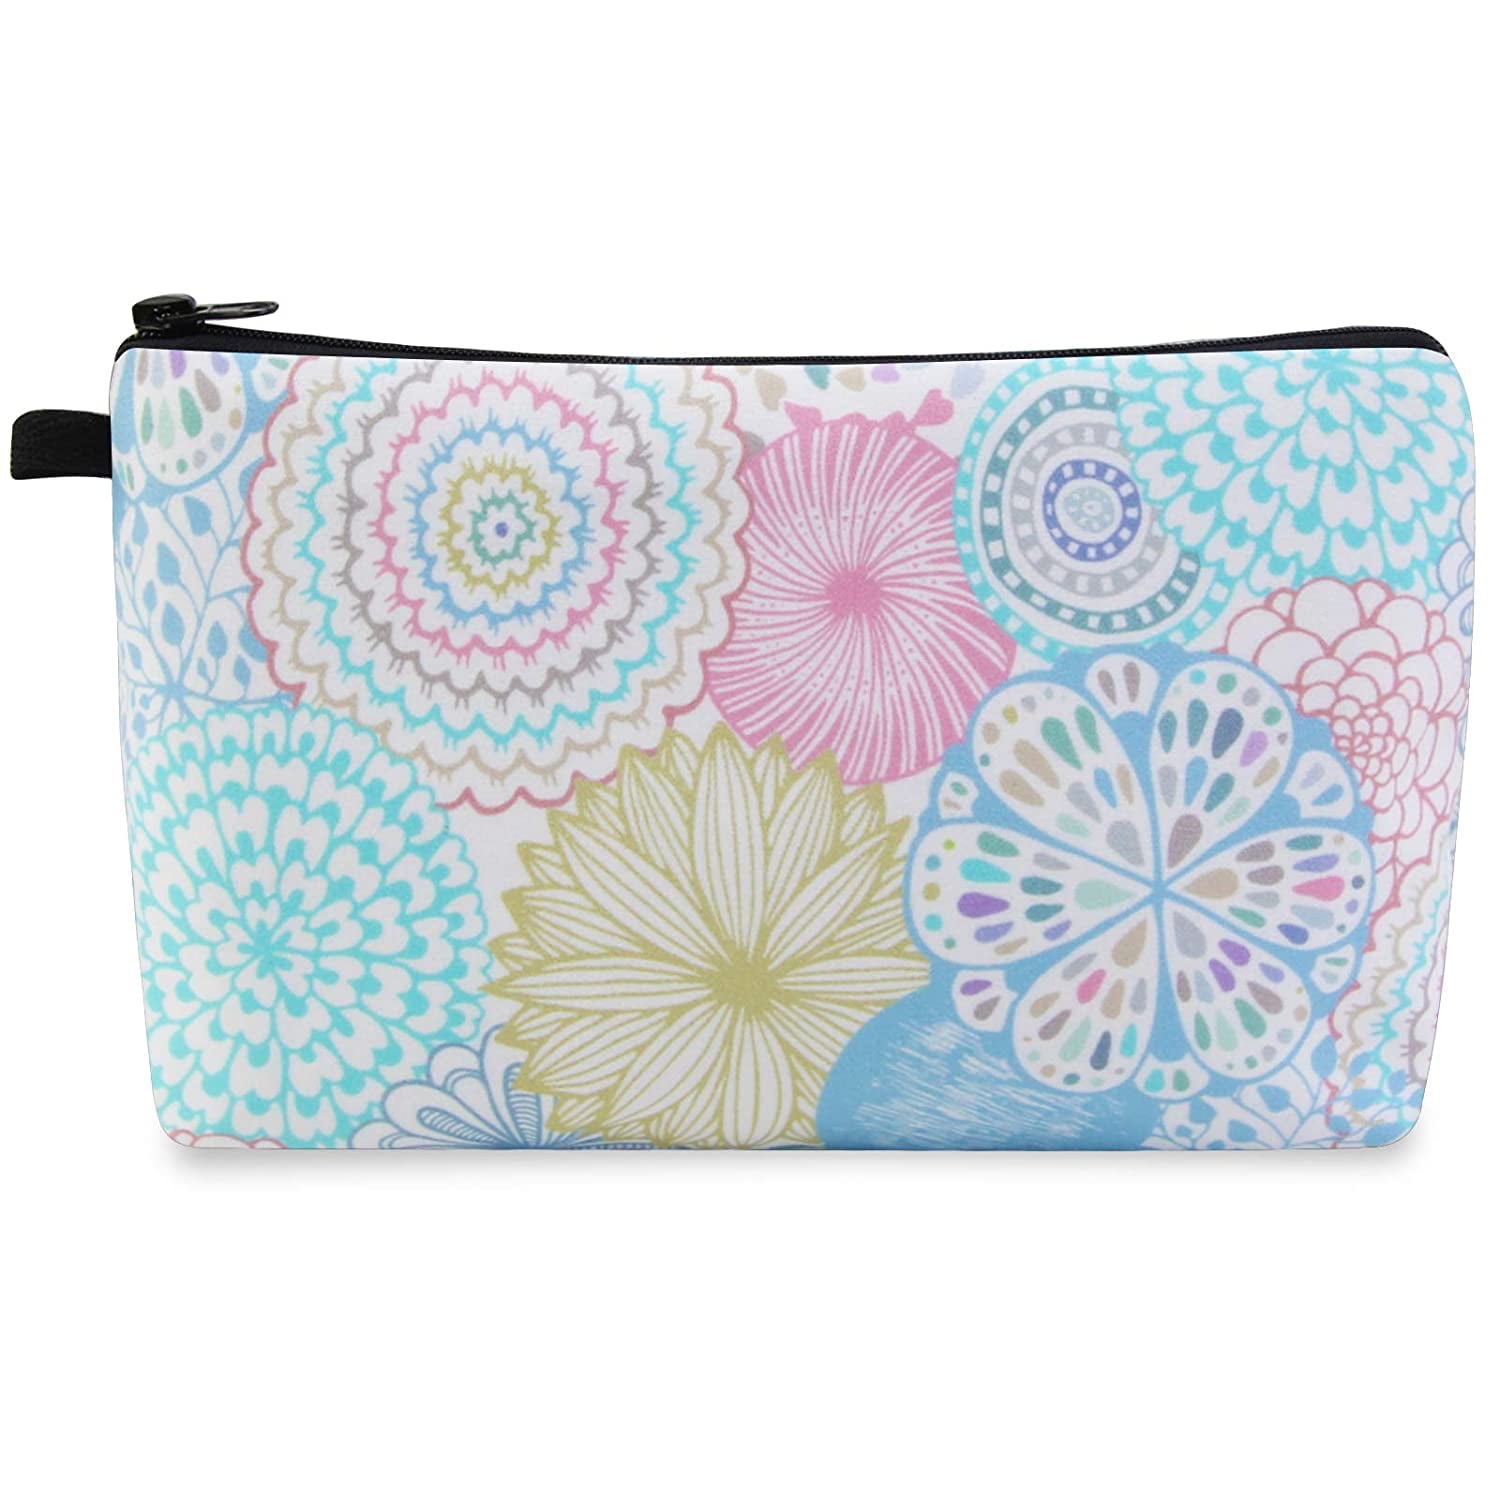 Womens Vintage Coin Purse Colored Eyes Pattern Canvas Makeup Bag With Zipper For Women